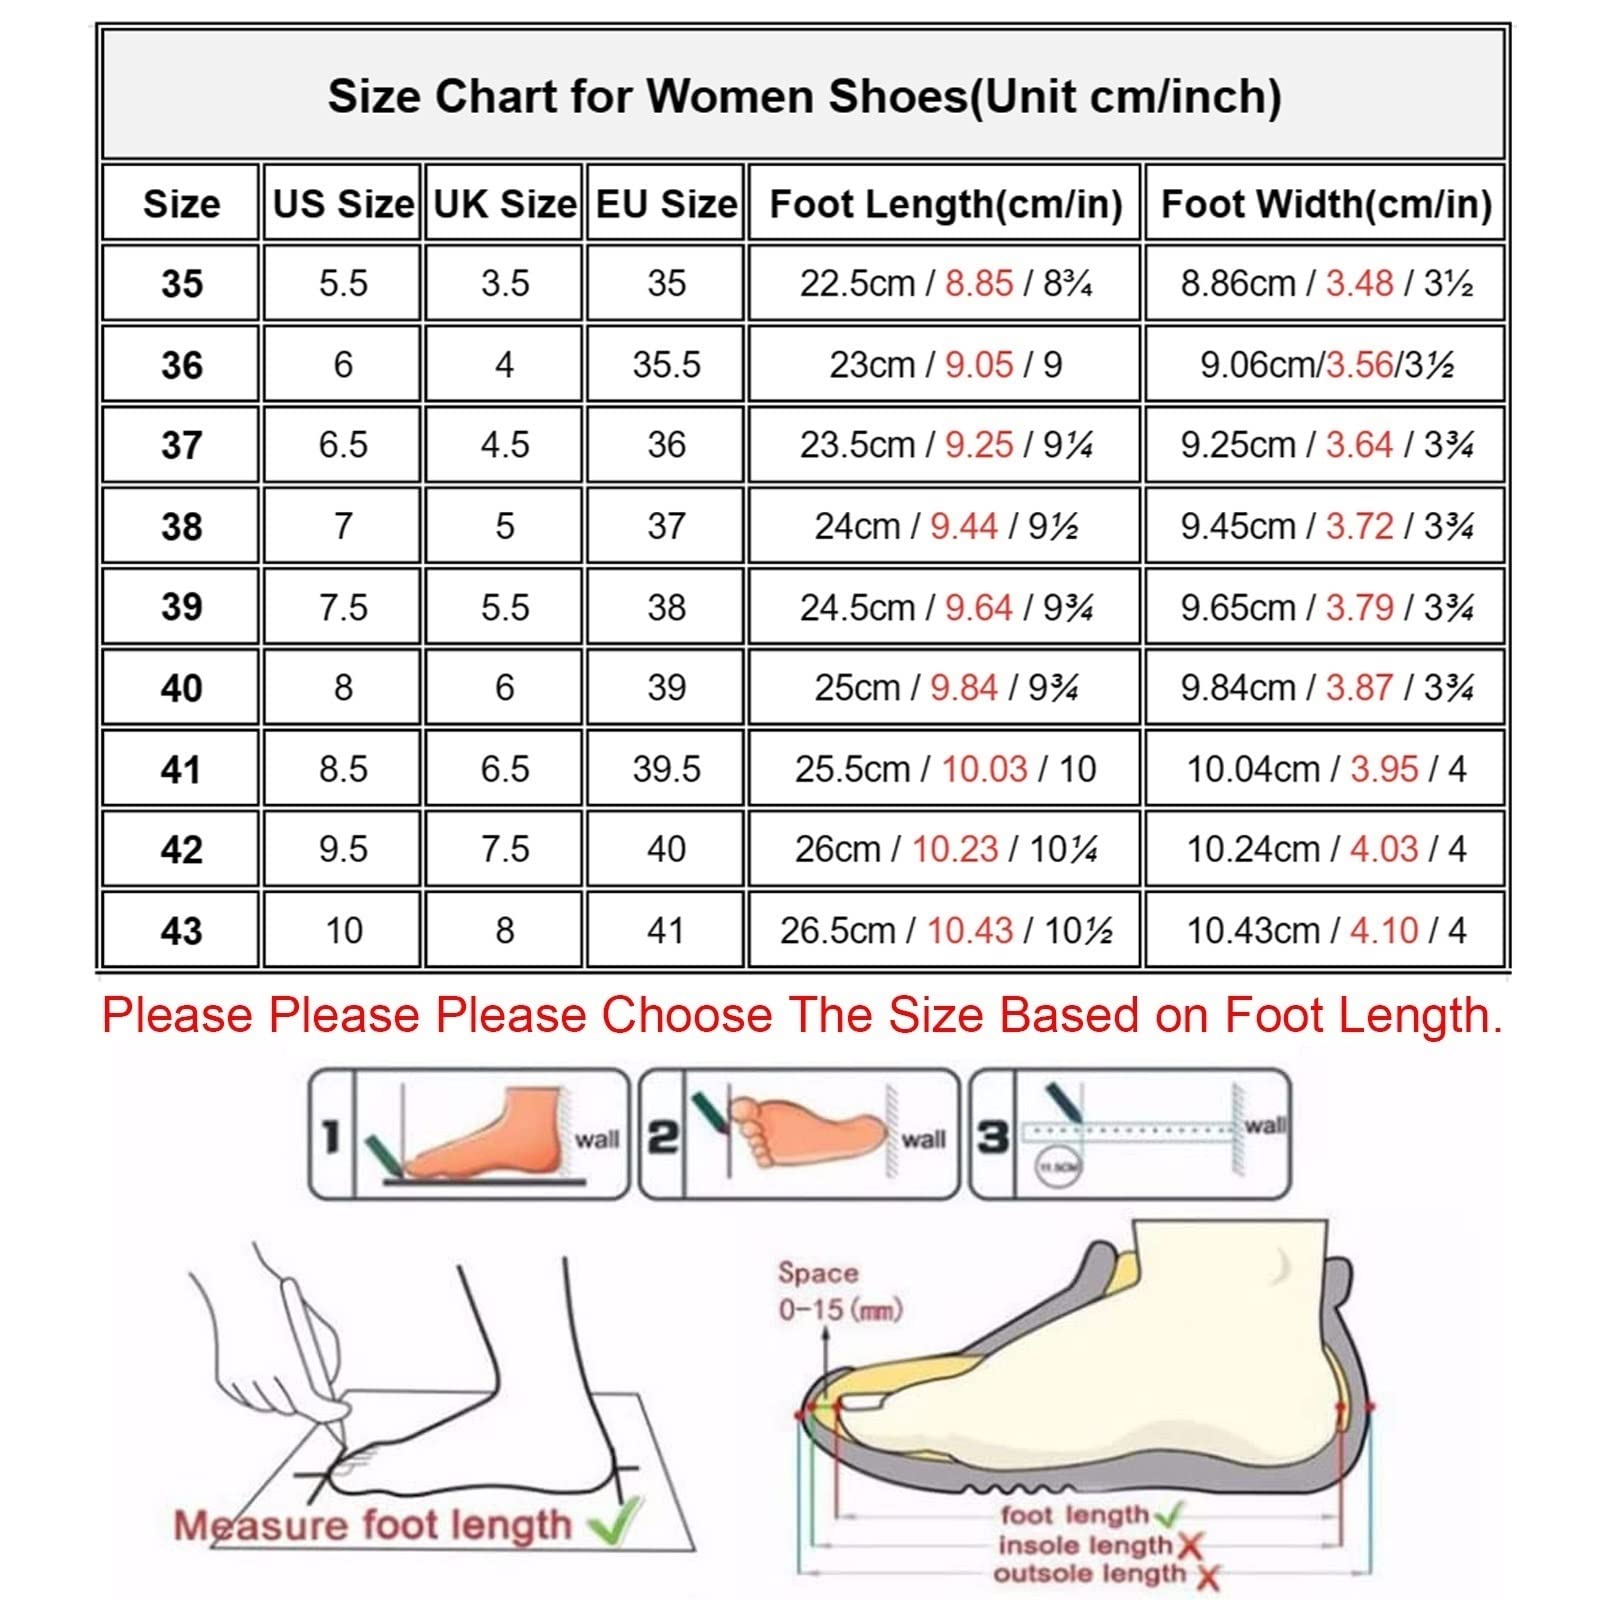 Women's Platform Embroidered Increased Sneakers Comfort Hidden High Heels Leather Wedges Tennis Fashion Breathable Jogging Walking Dress Sneakers Orthotic Low-top Bride Wedding Shoes (Color : Black,